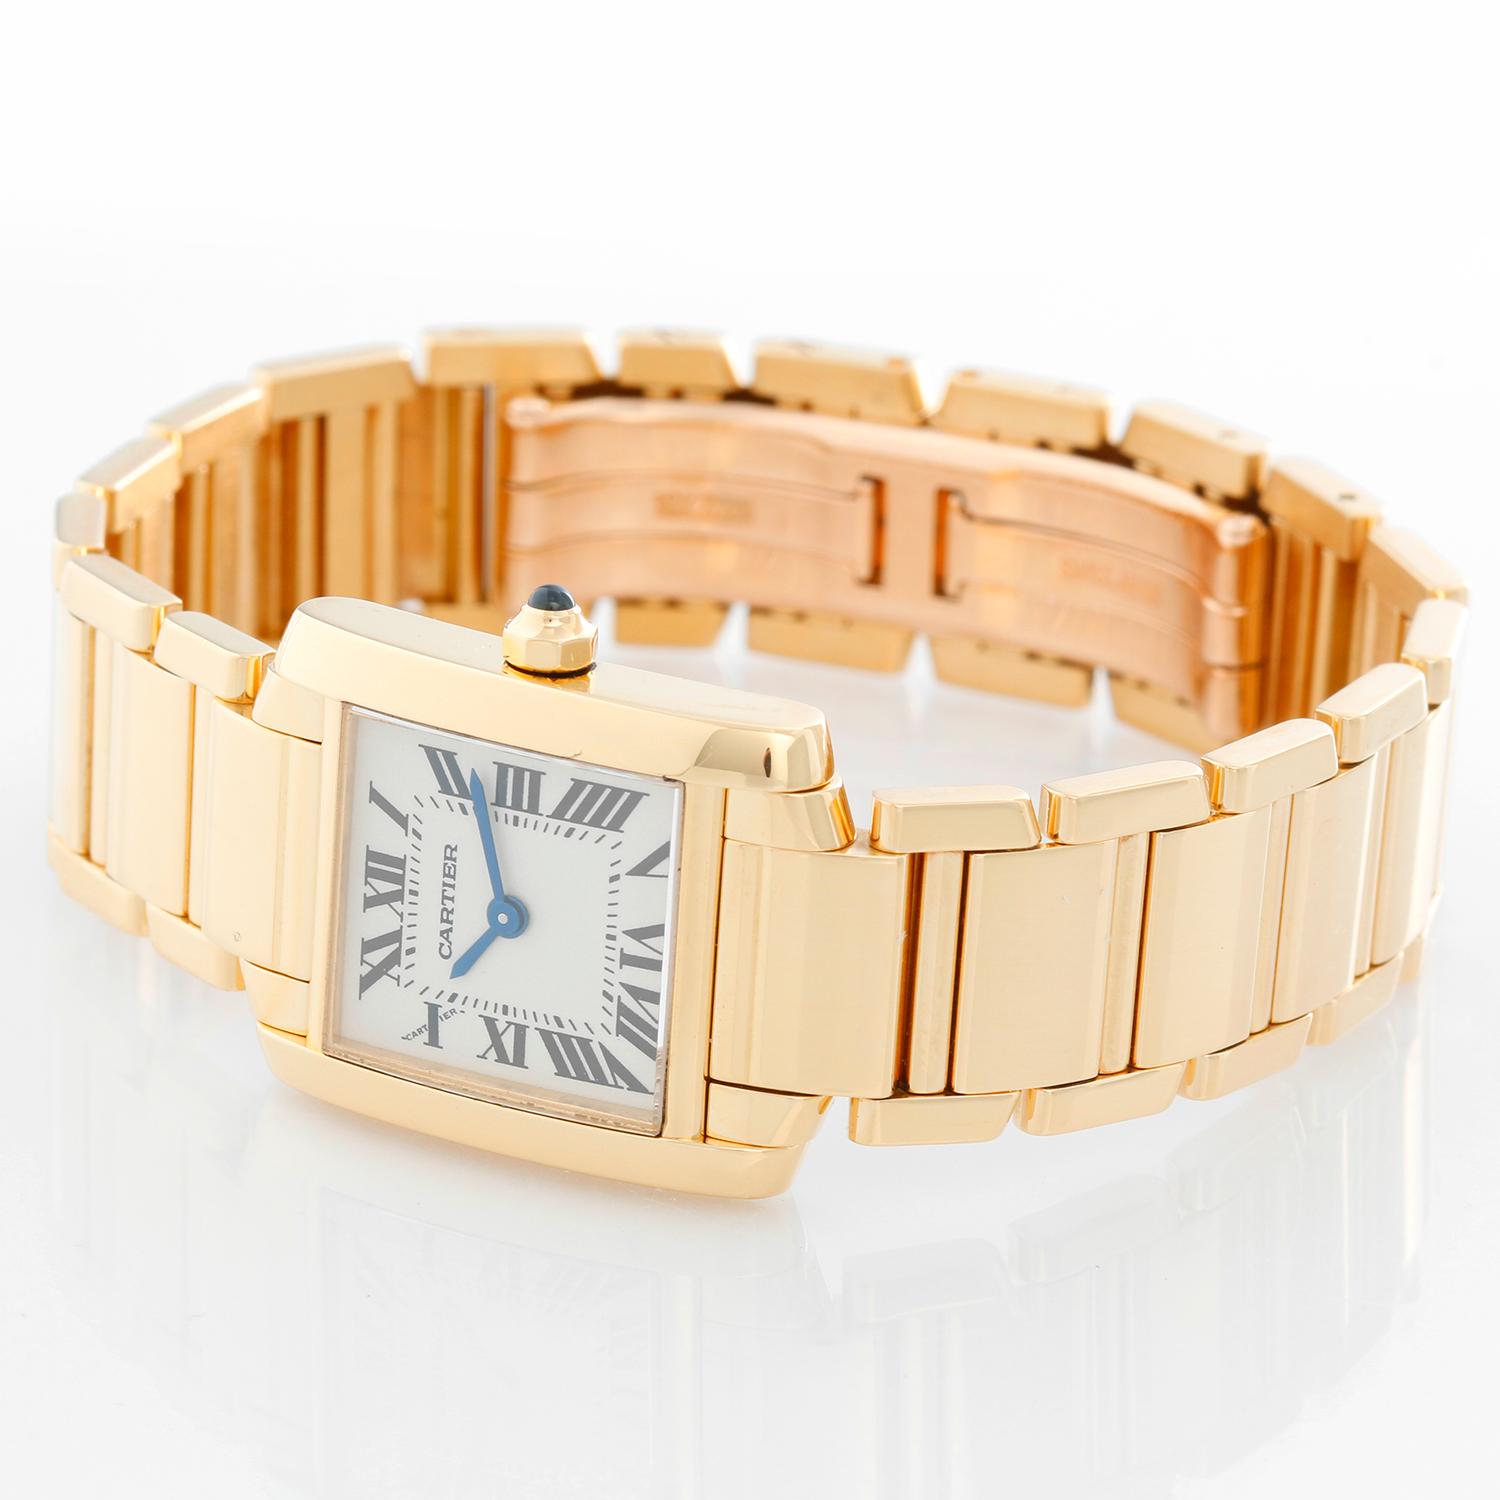 Cartier Tank Francaise 18k Yellow Gold Ladies Watch - Quartz. 18k yellow gold  case (20mm x 25mm). Ivory colored dial with black Roman numerals. 18k yellow gold Cartier Tank Francaise bracelet. Pre-owned with custom box. 